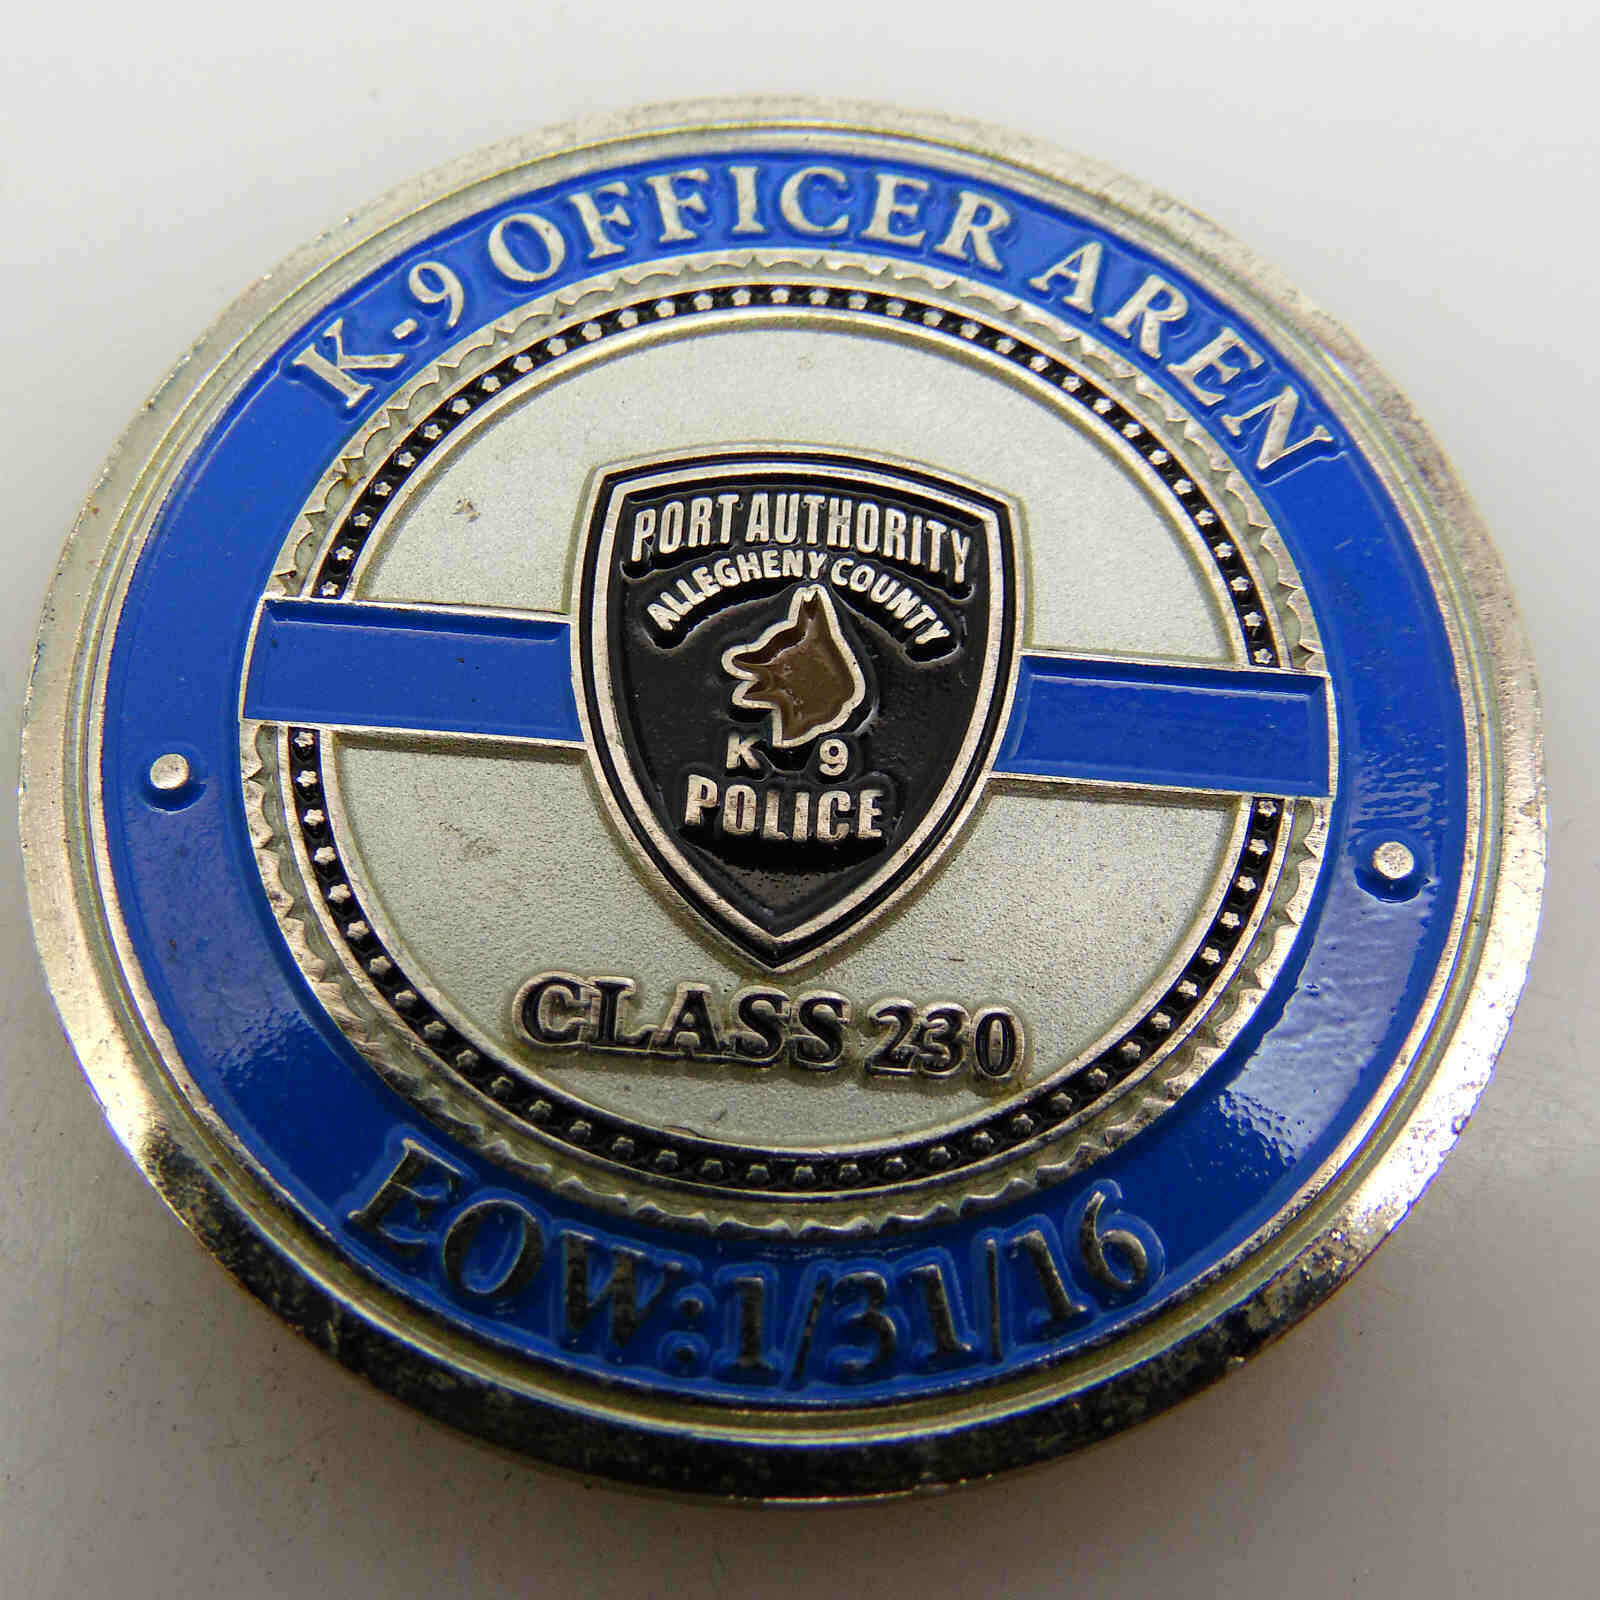 PORT AUTHORITY ALLEGHENY COUNTY POLICE K-9 OFFICER AREN CLASS 230 CHALLENGE COIN